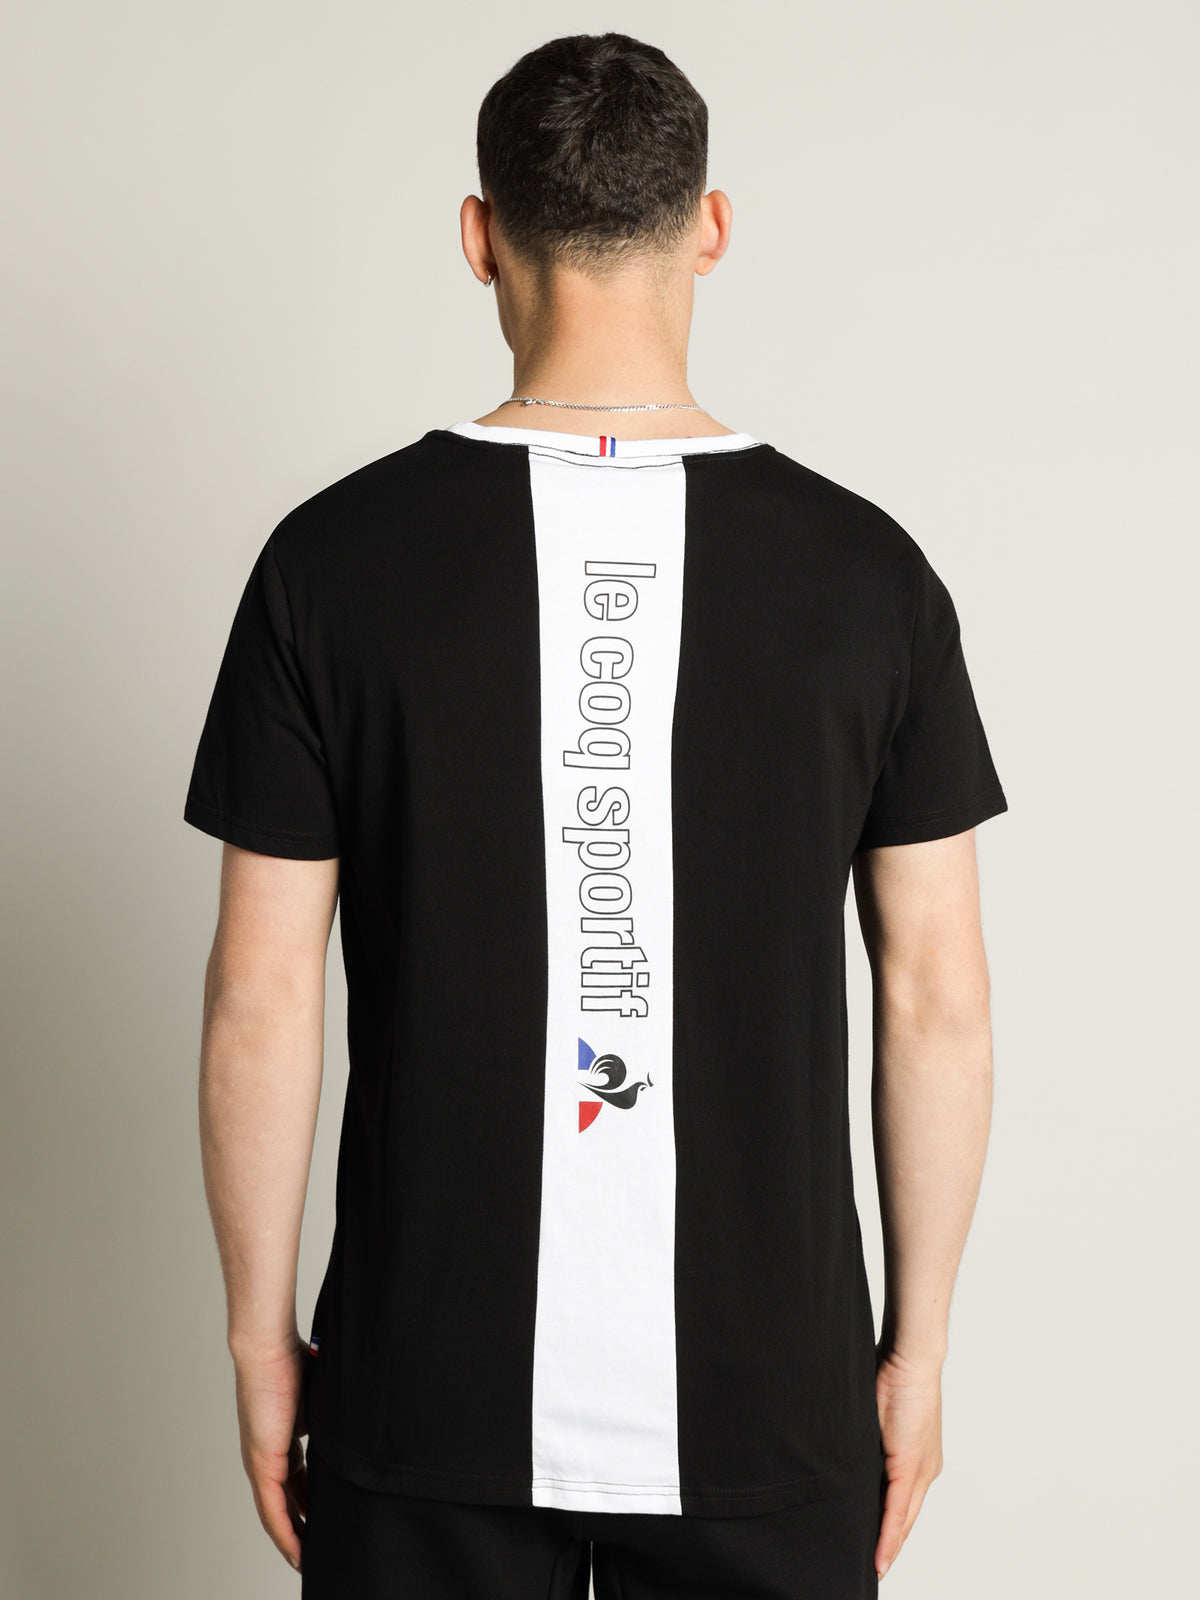 Musette T-Shirt in Black